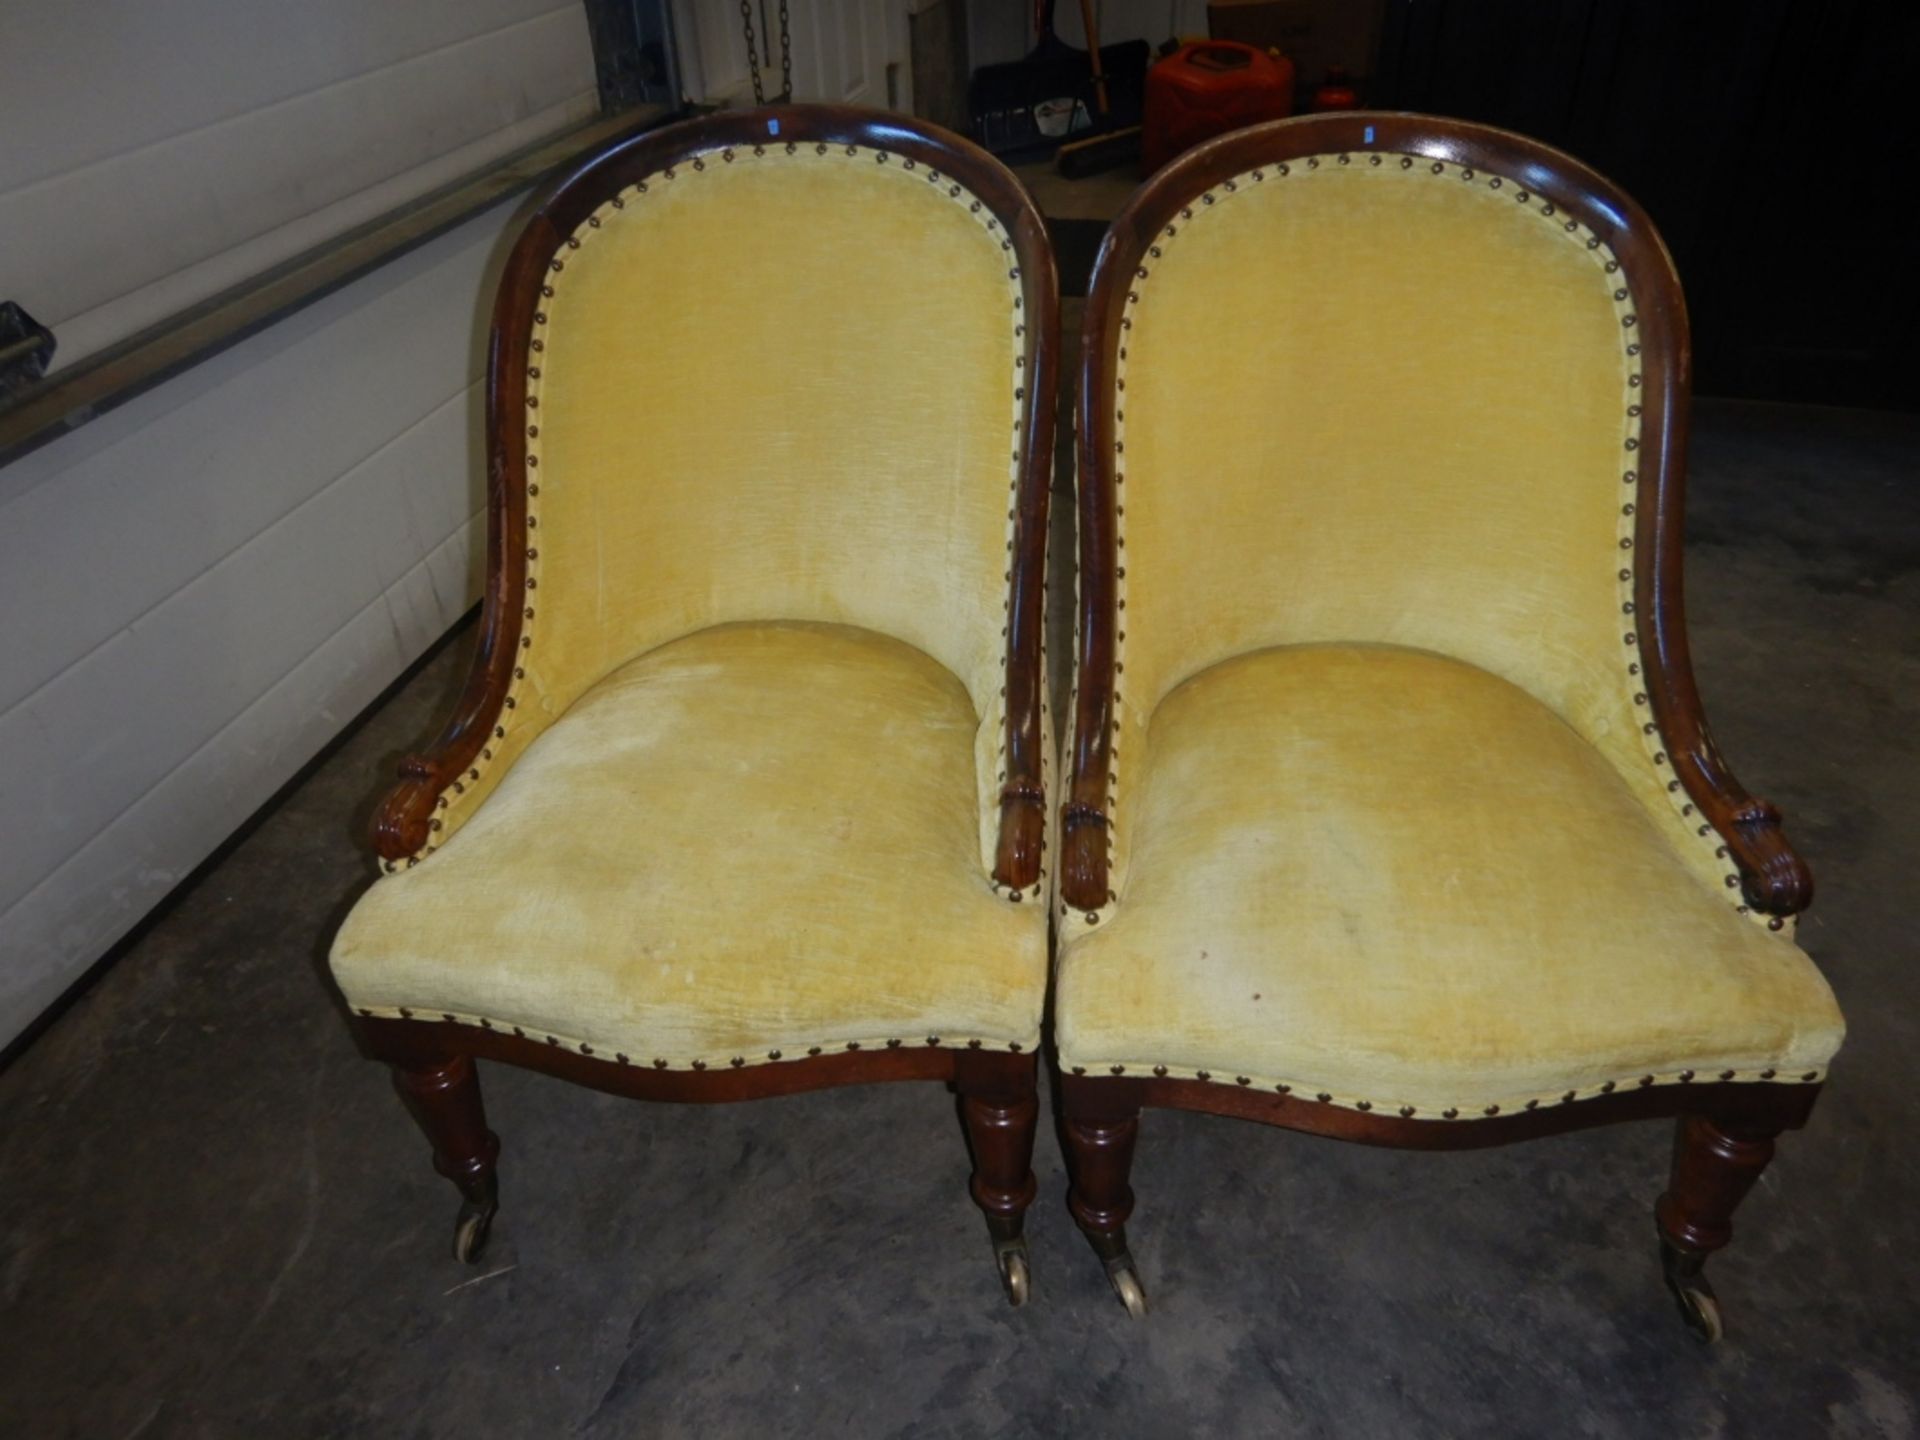 ANTIQUE PARLOR CHAIRS (2) - YELLOW - Image 7 of 13